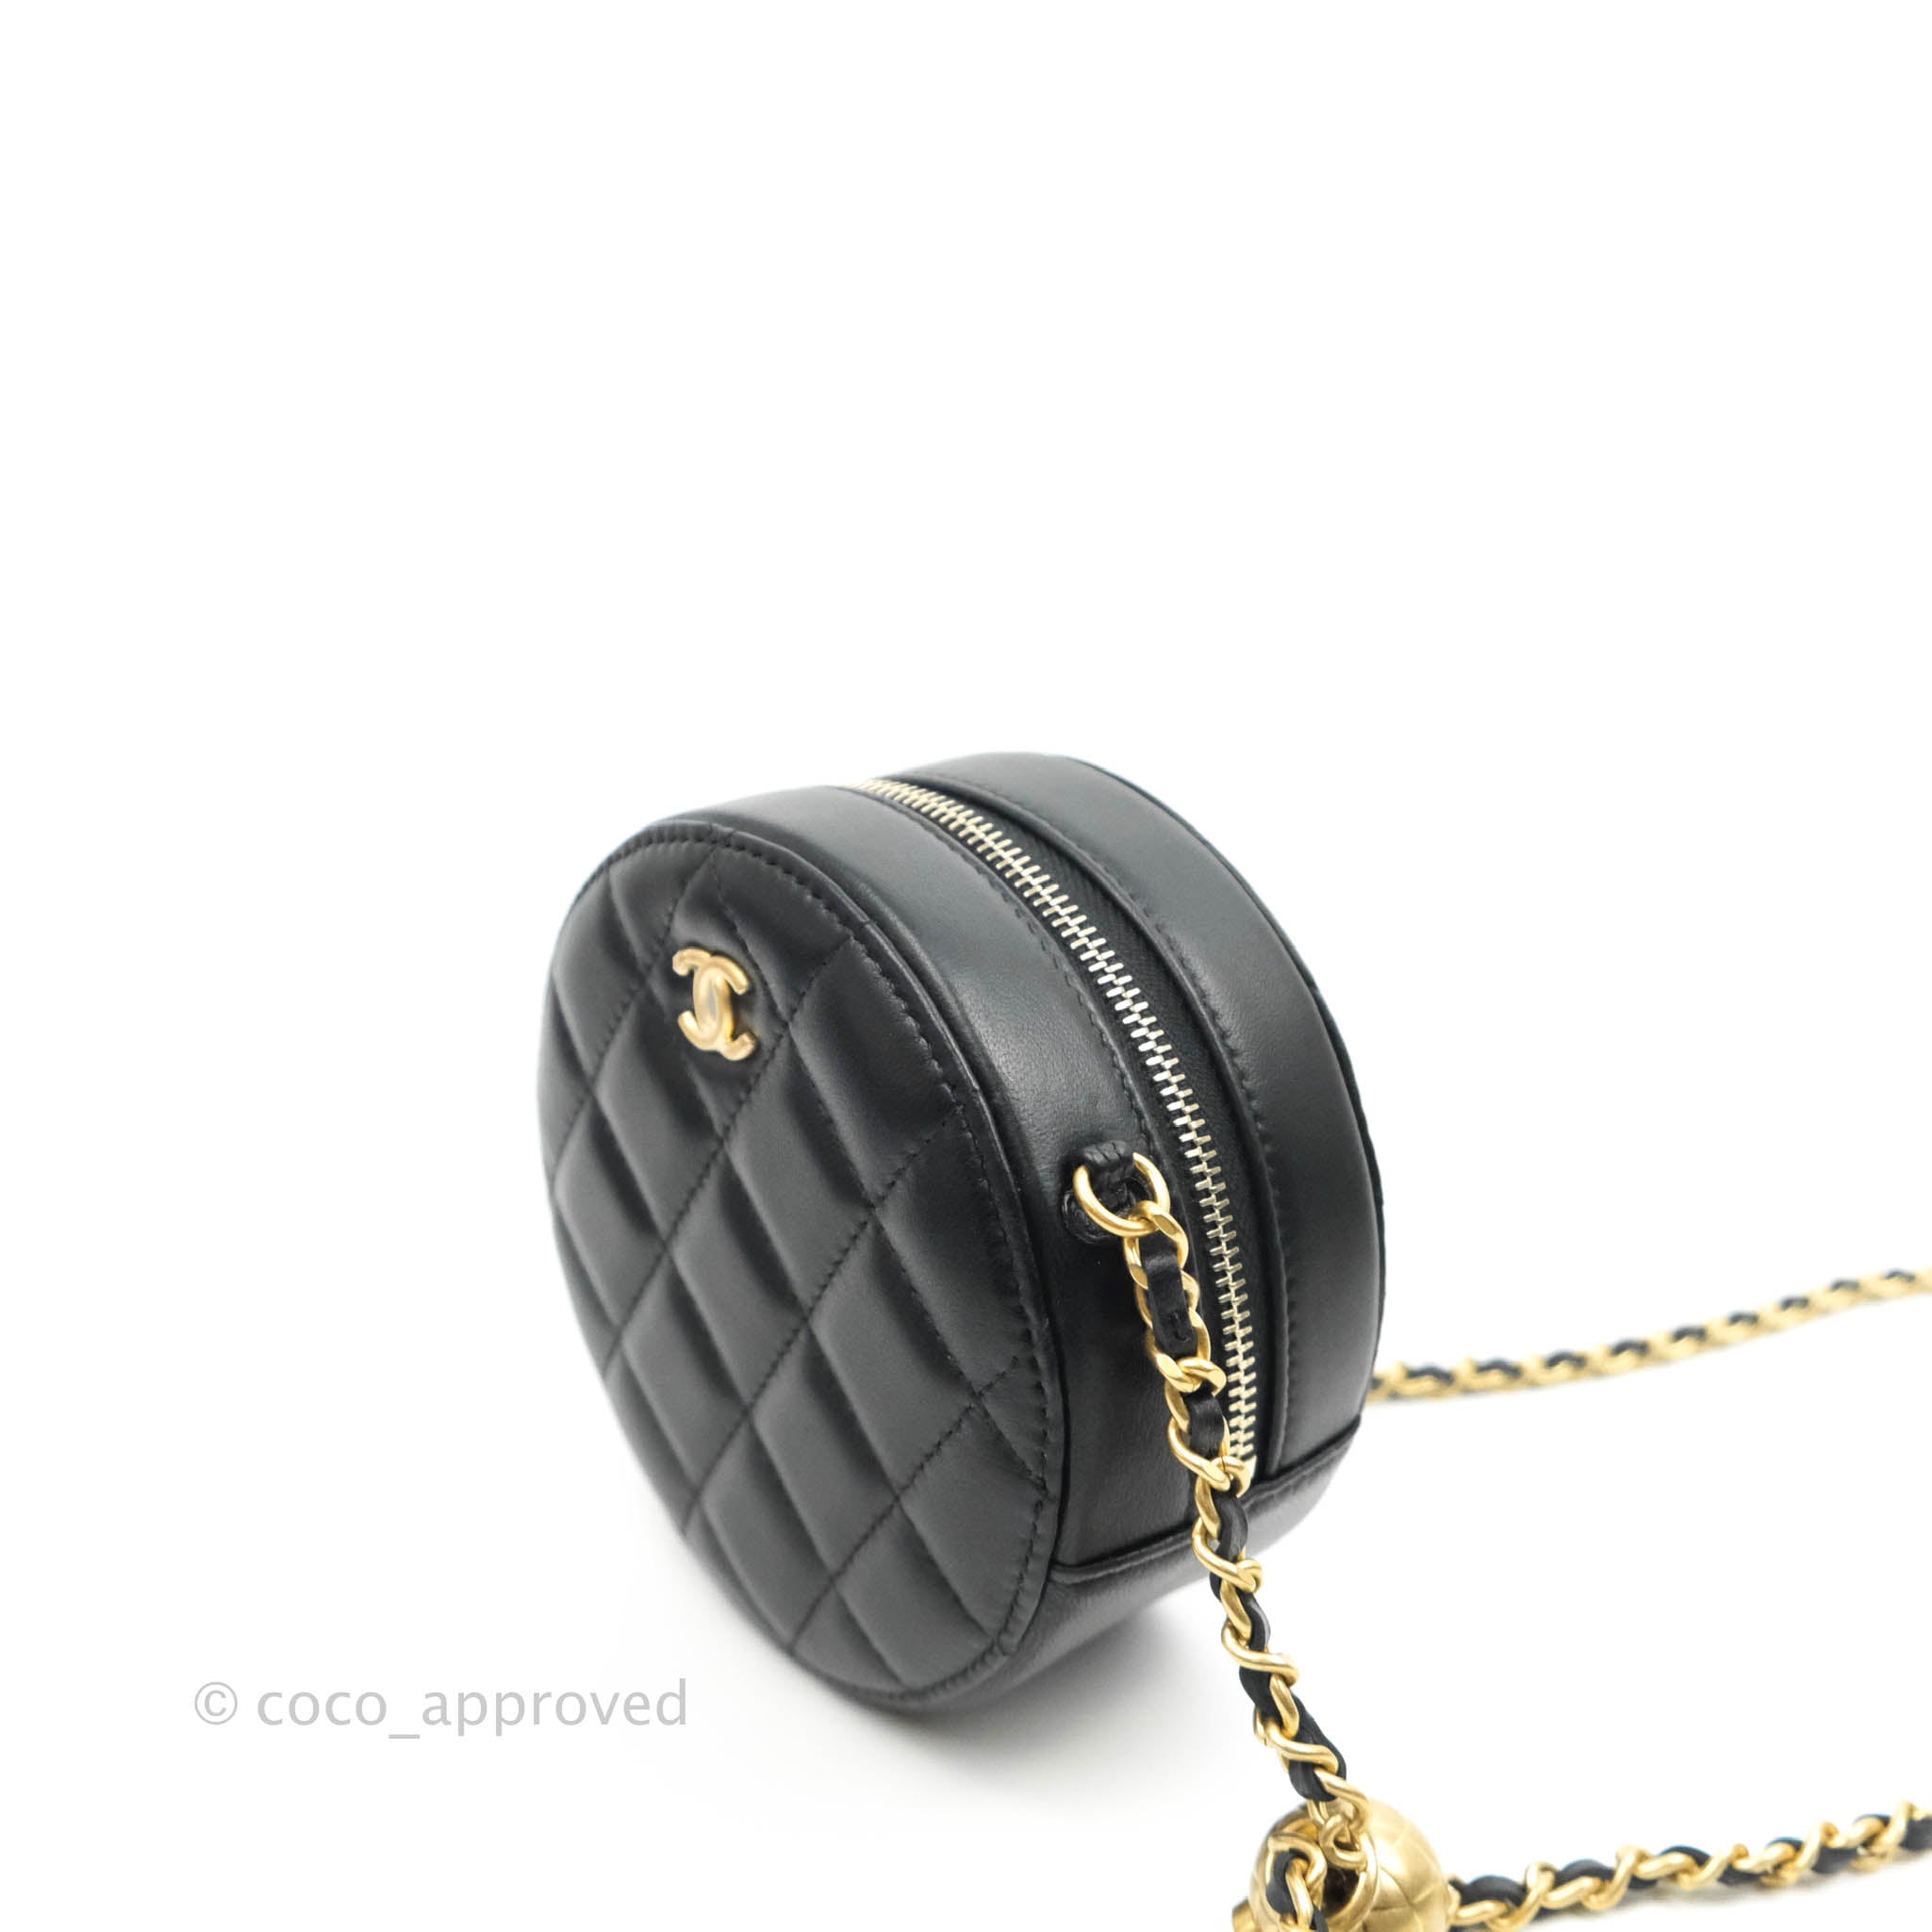 Chanel Quilted Round Pearl Crush Clutch With Chain Black Lambskin